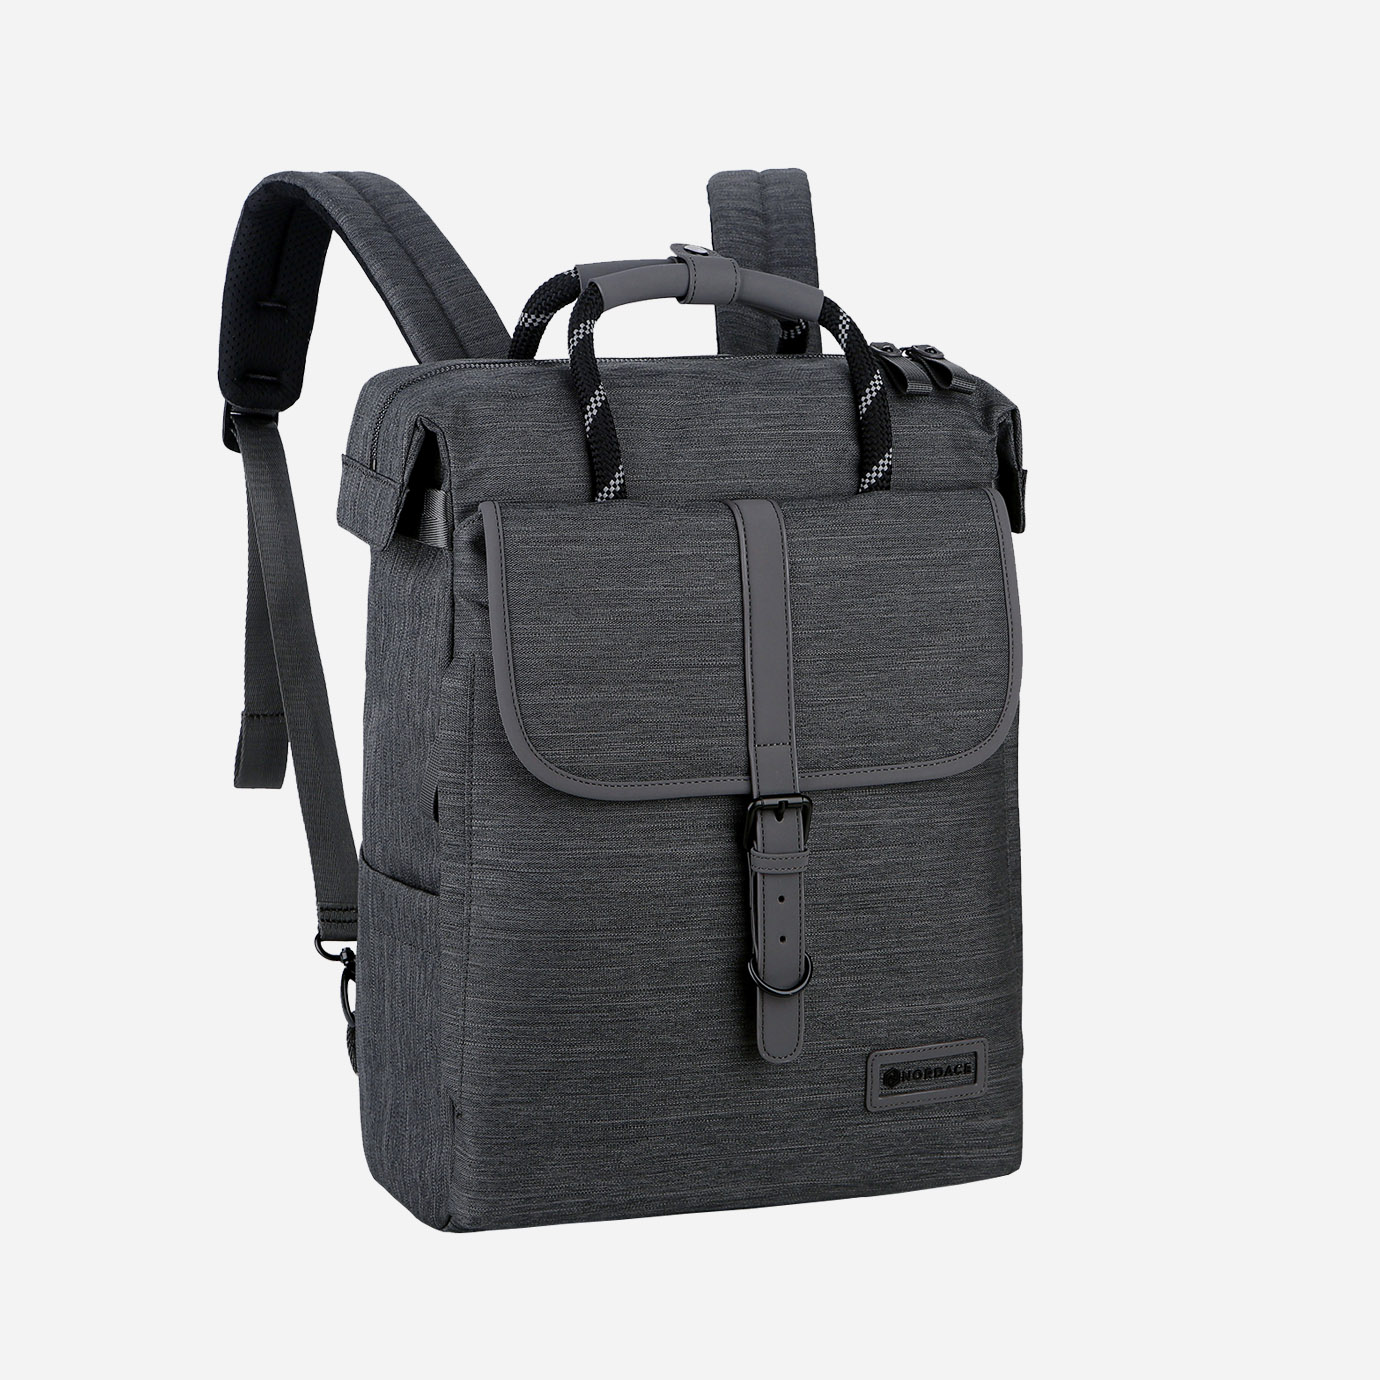 Nordace Bags | Comino Totepack-Charcoal